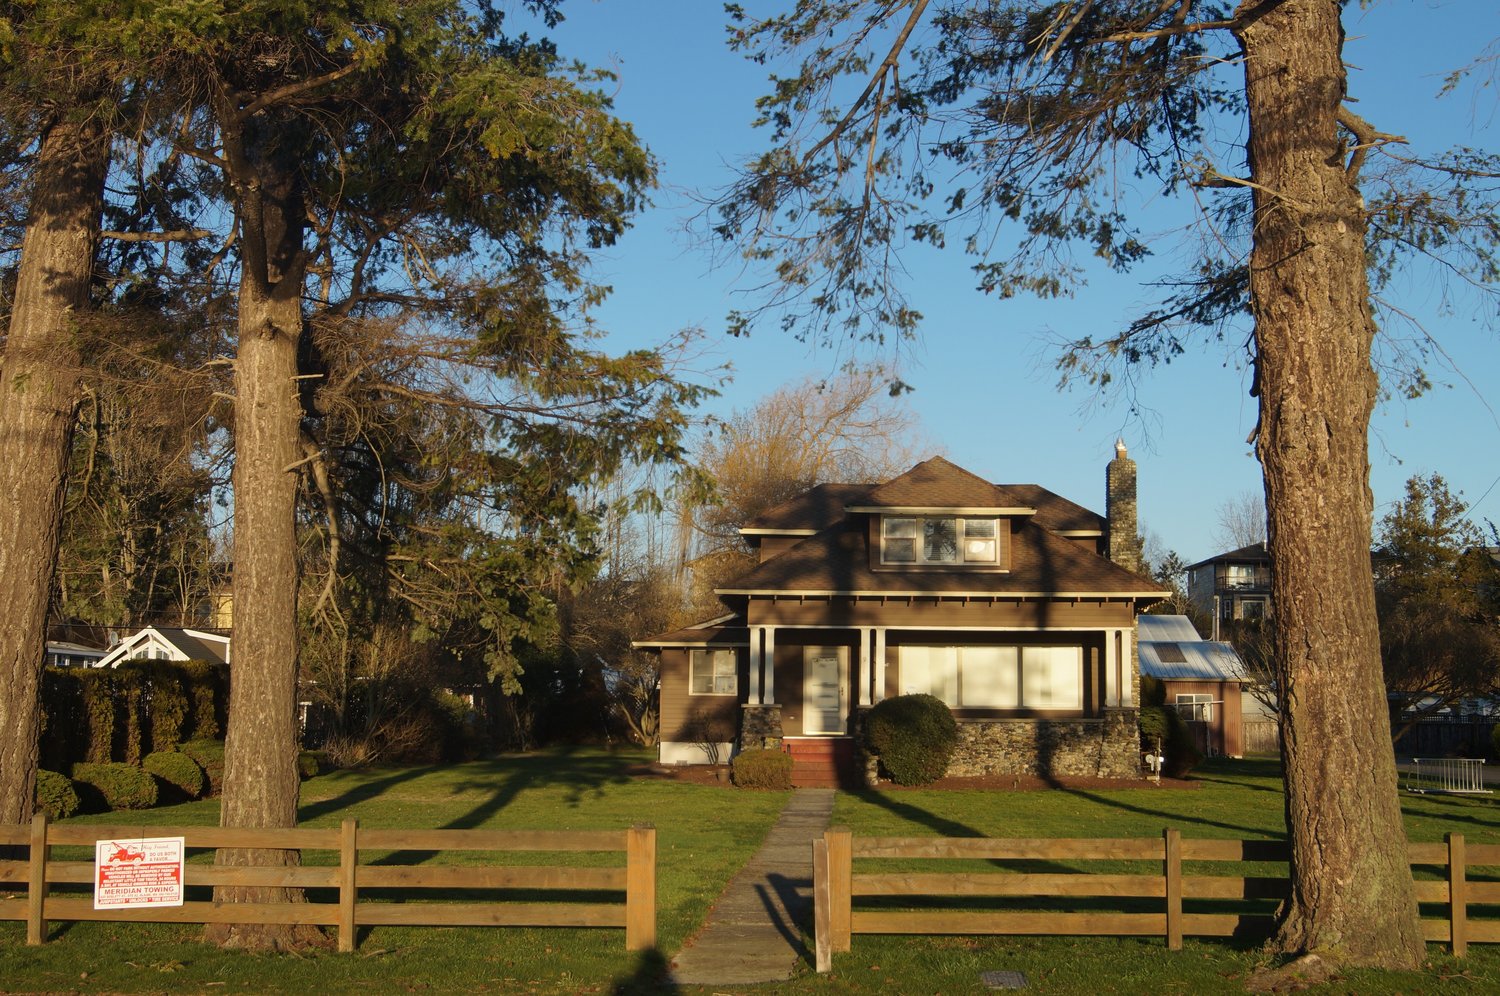 The Vogt family homestead at 7968 Birch Bay Drive